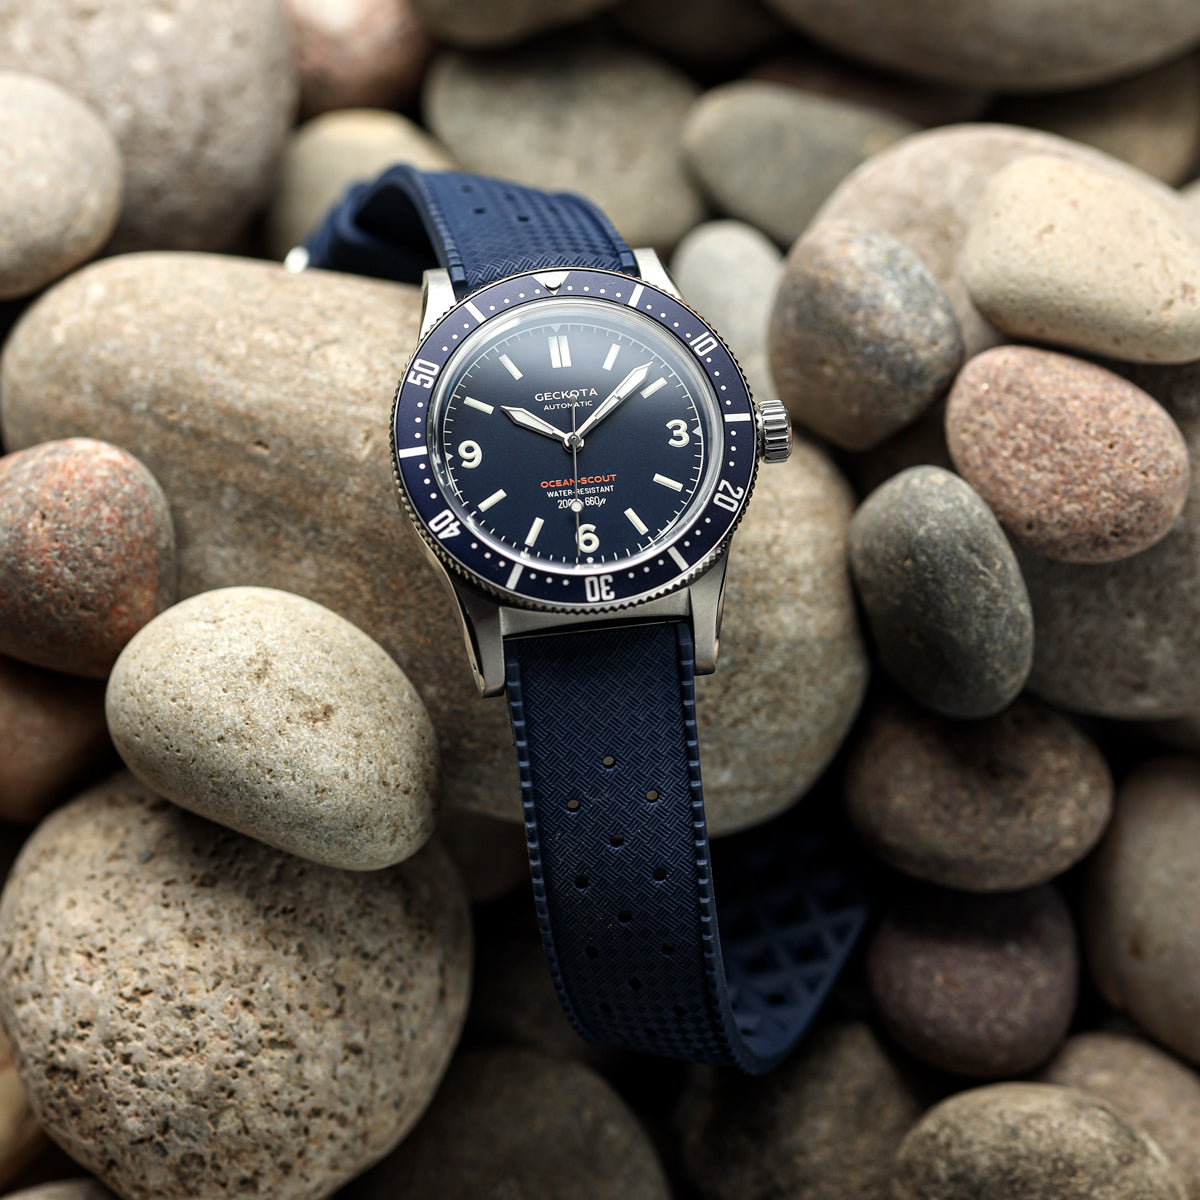 Classic Tropical Style FKM Rubber Watch Strap - Deep Sea Blue - additional image 4